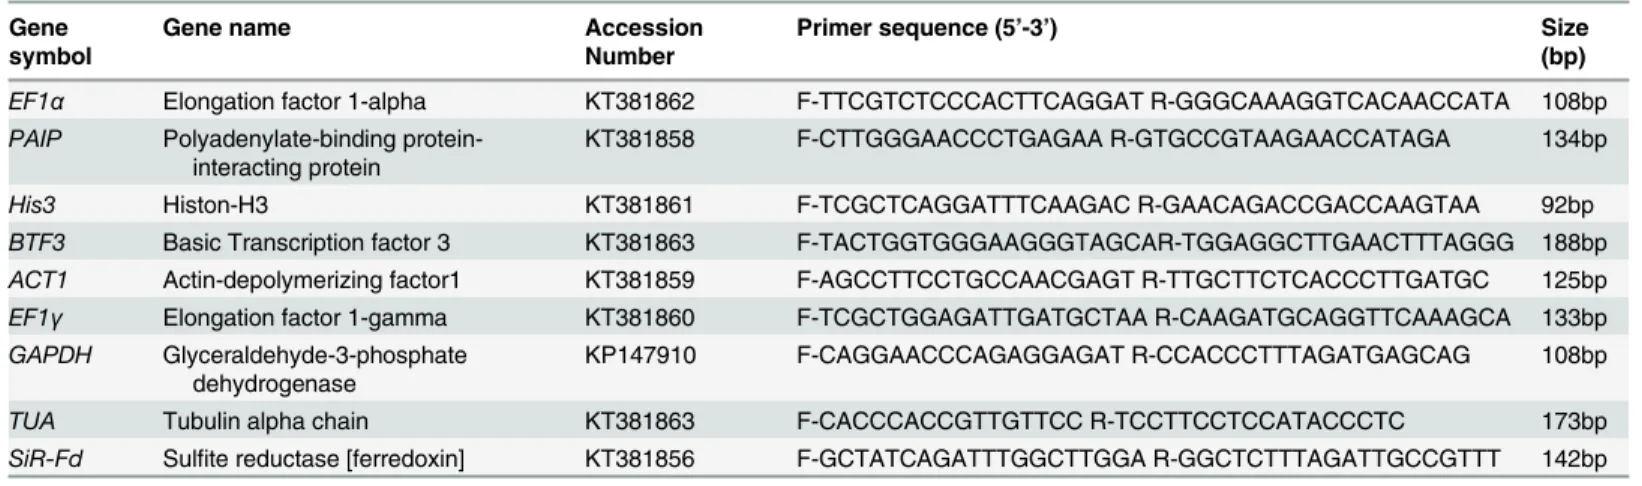 Table 1. Primer sequences and related information for each candidate reference gene.